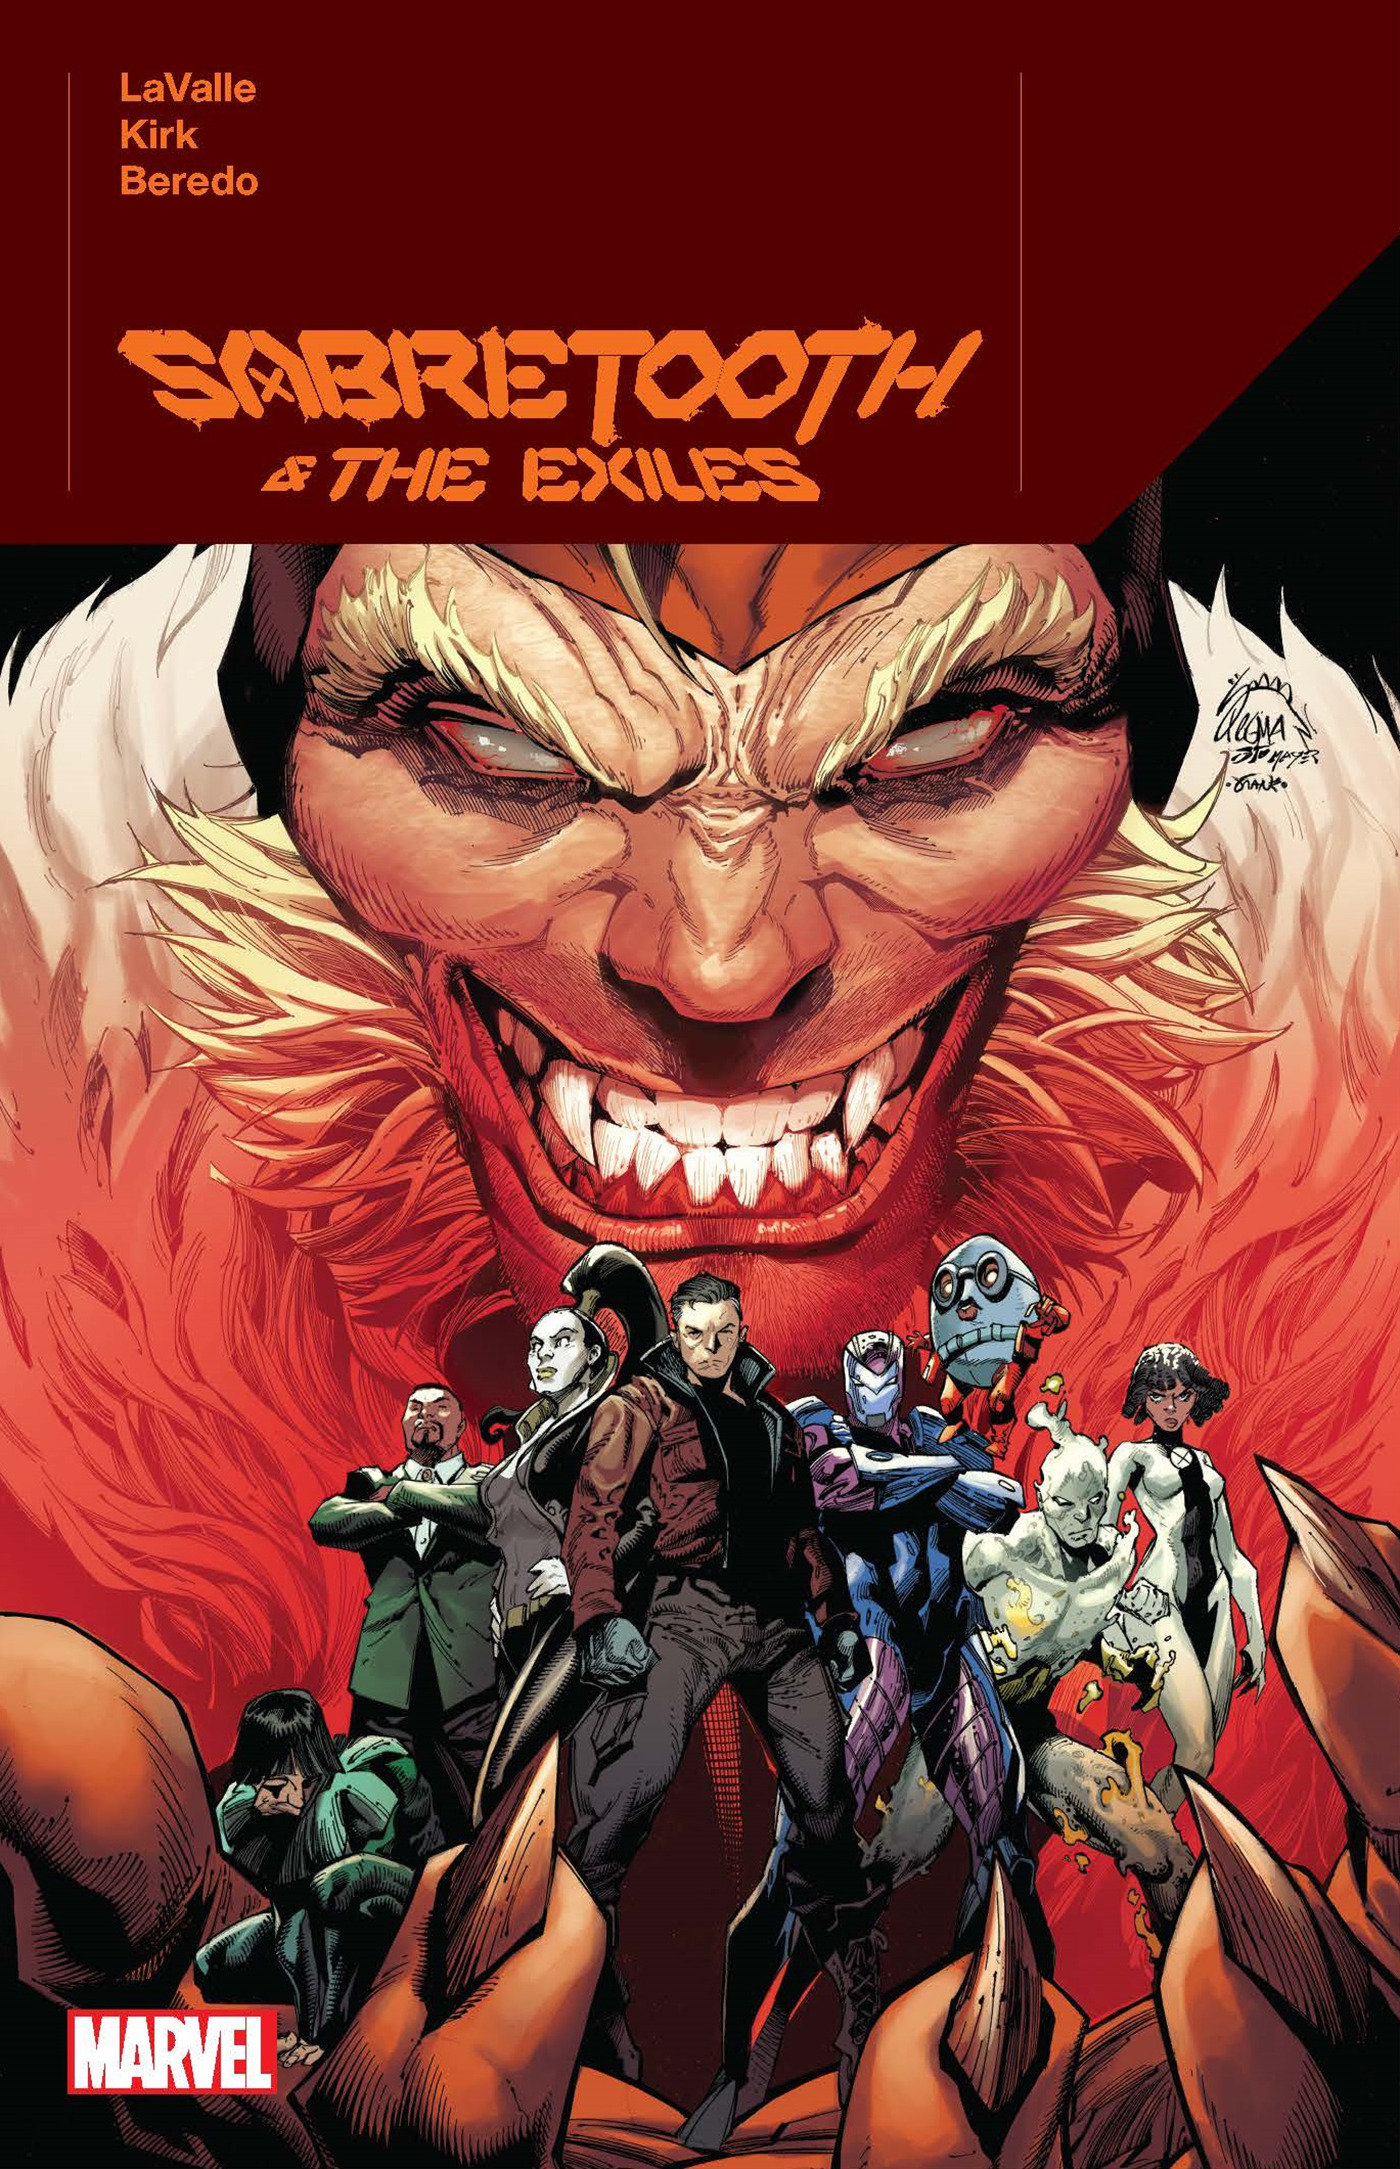 Sabretooth & The Exiles Graphic Novel